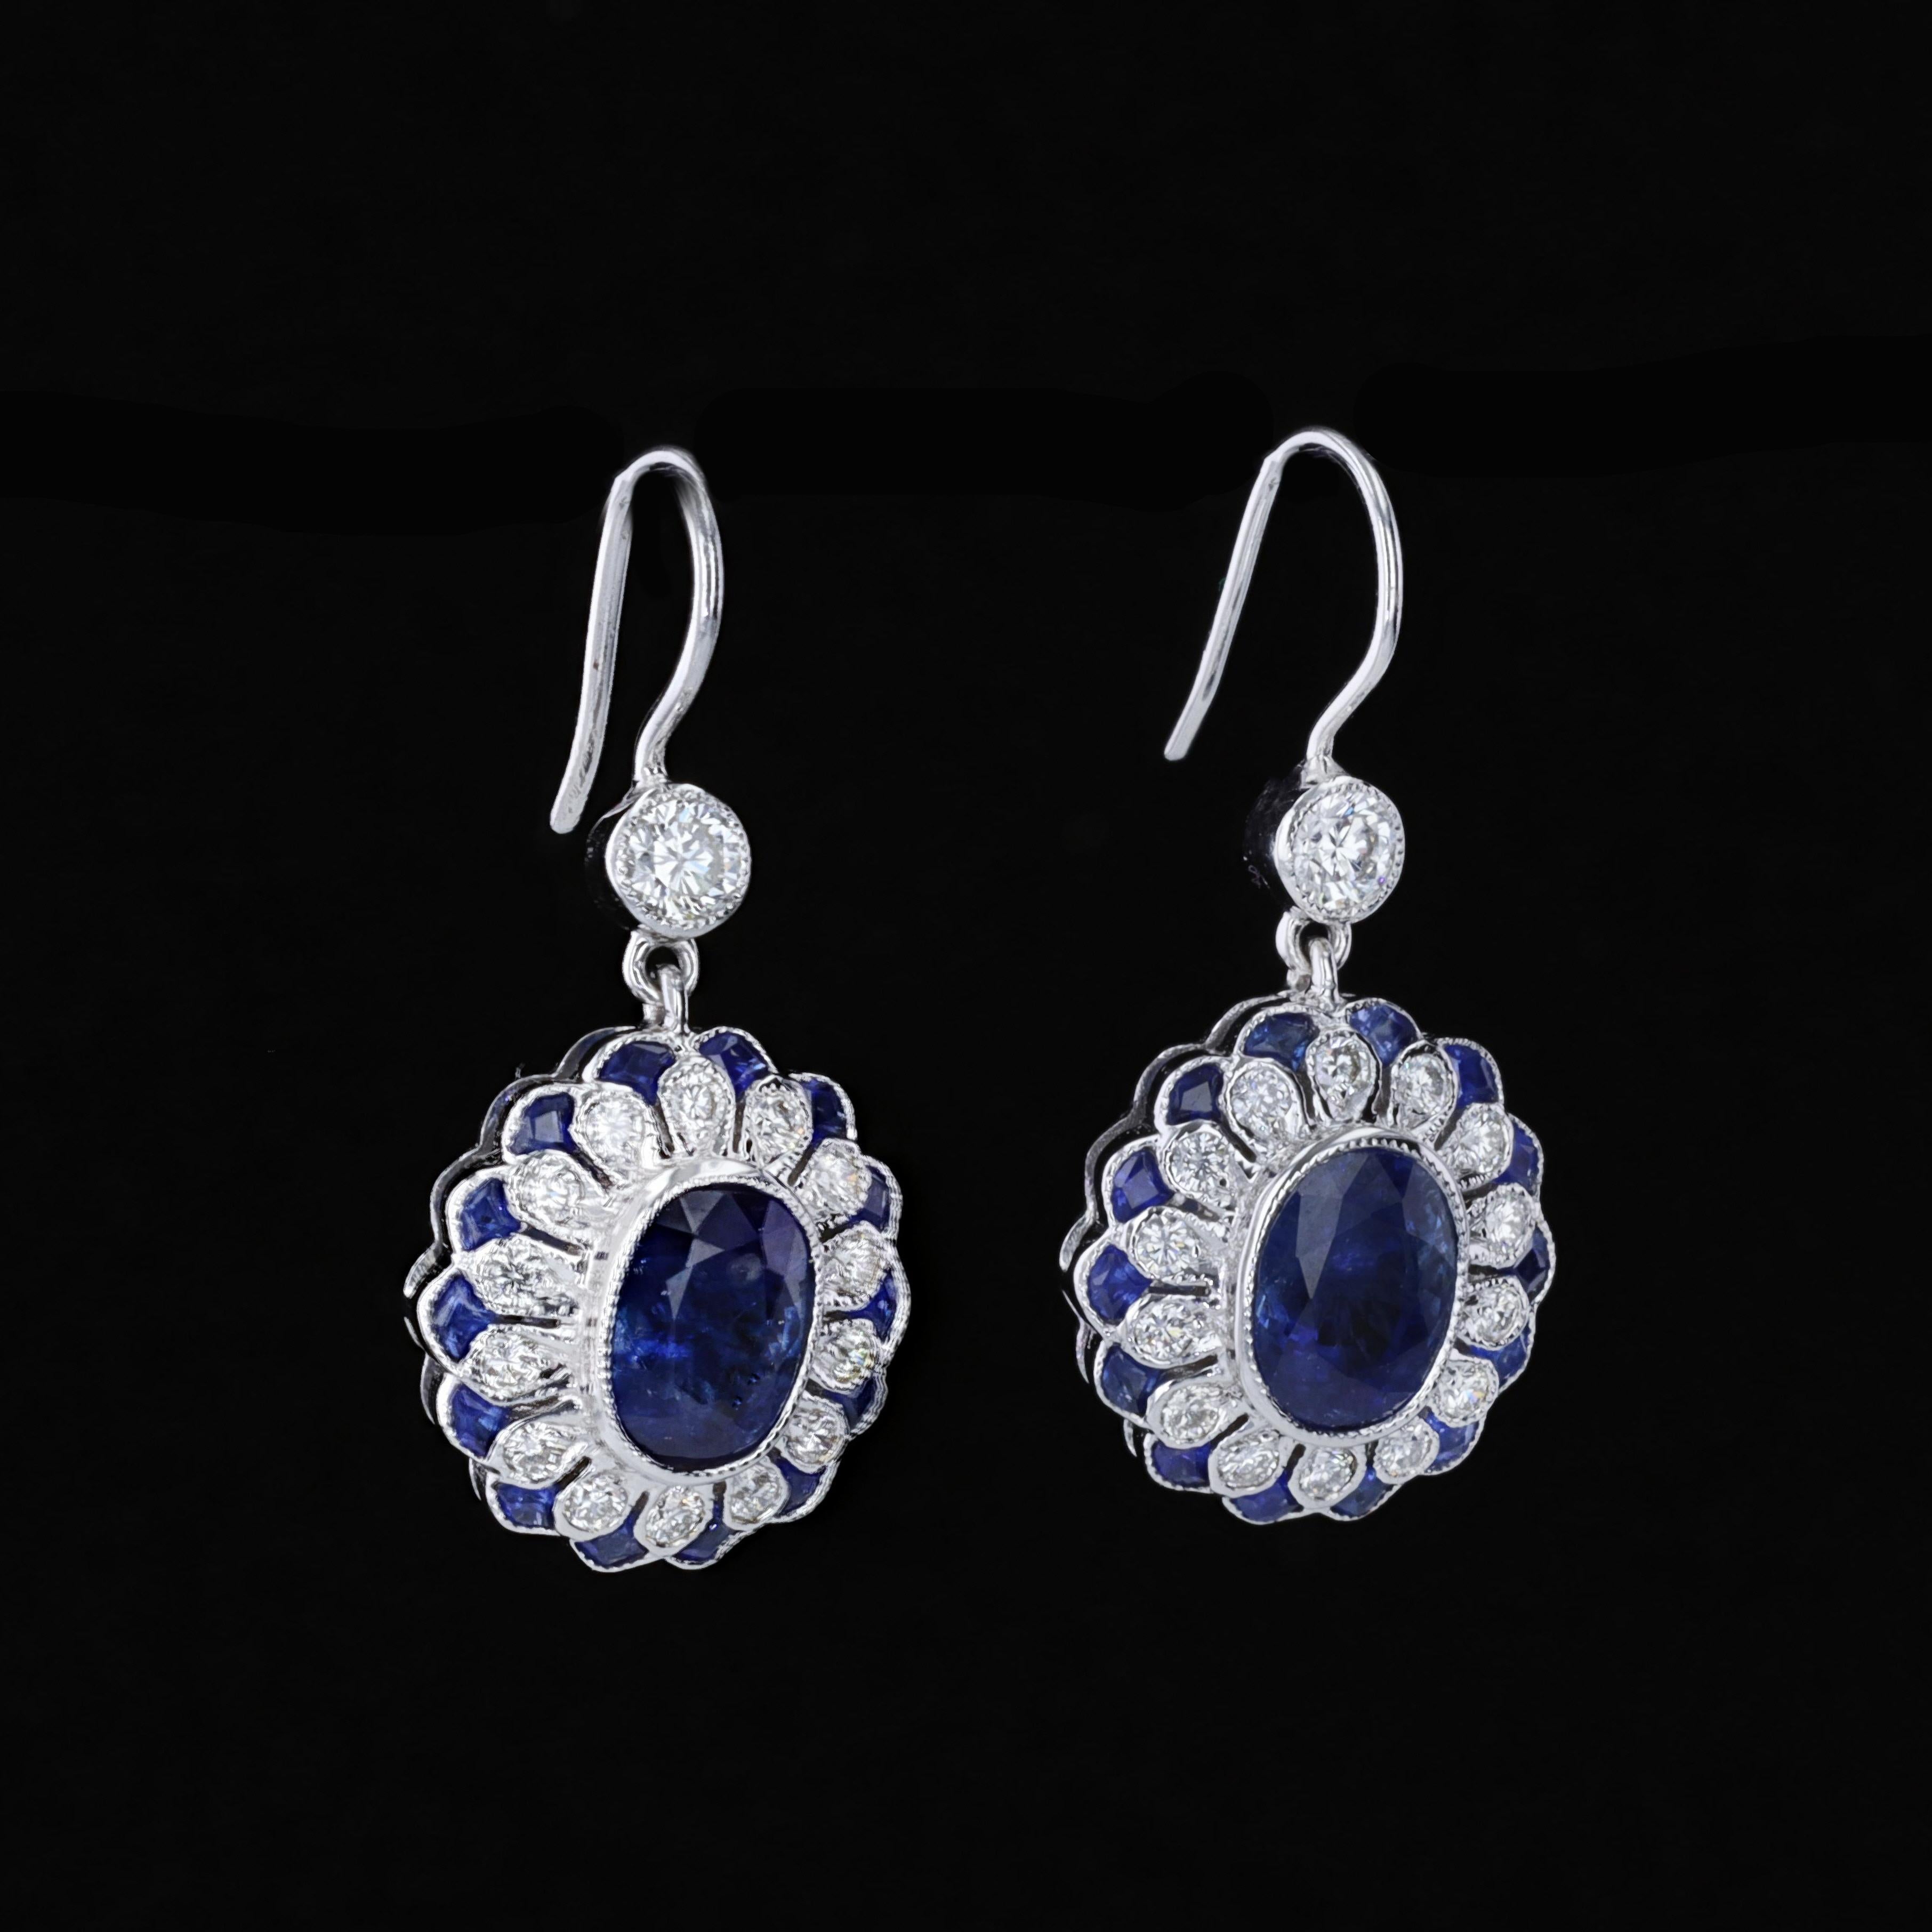 These sparkling earrings feature lovely oval cut sapphires that weigh approximately 3.71ct. The sapphires are accentuated by sparkling round cut diamonds and fan shape sapphires that weigh approximately 0.92ct and 0.72ct respectively. The color of